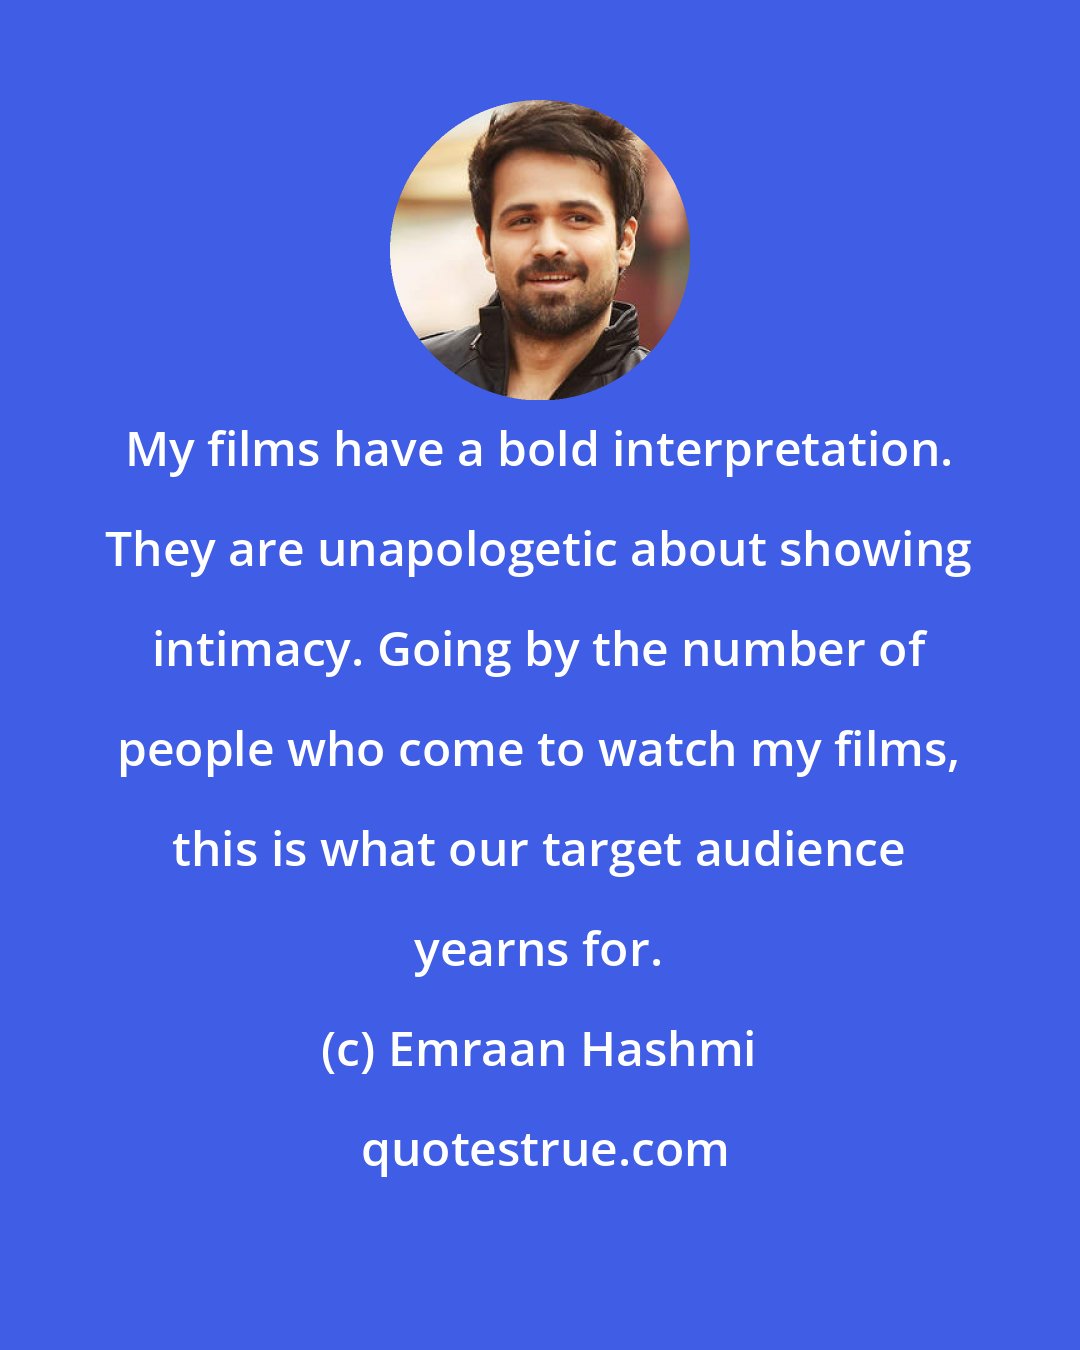 Emraan Hashmi: My films have a bold interpretation. They are unapologetic about showing intimacy. Going by the number of people who come to watch my films, this is what our target audience yearns for.